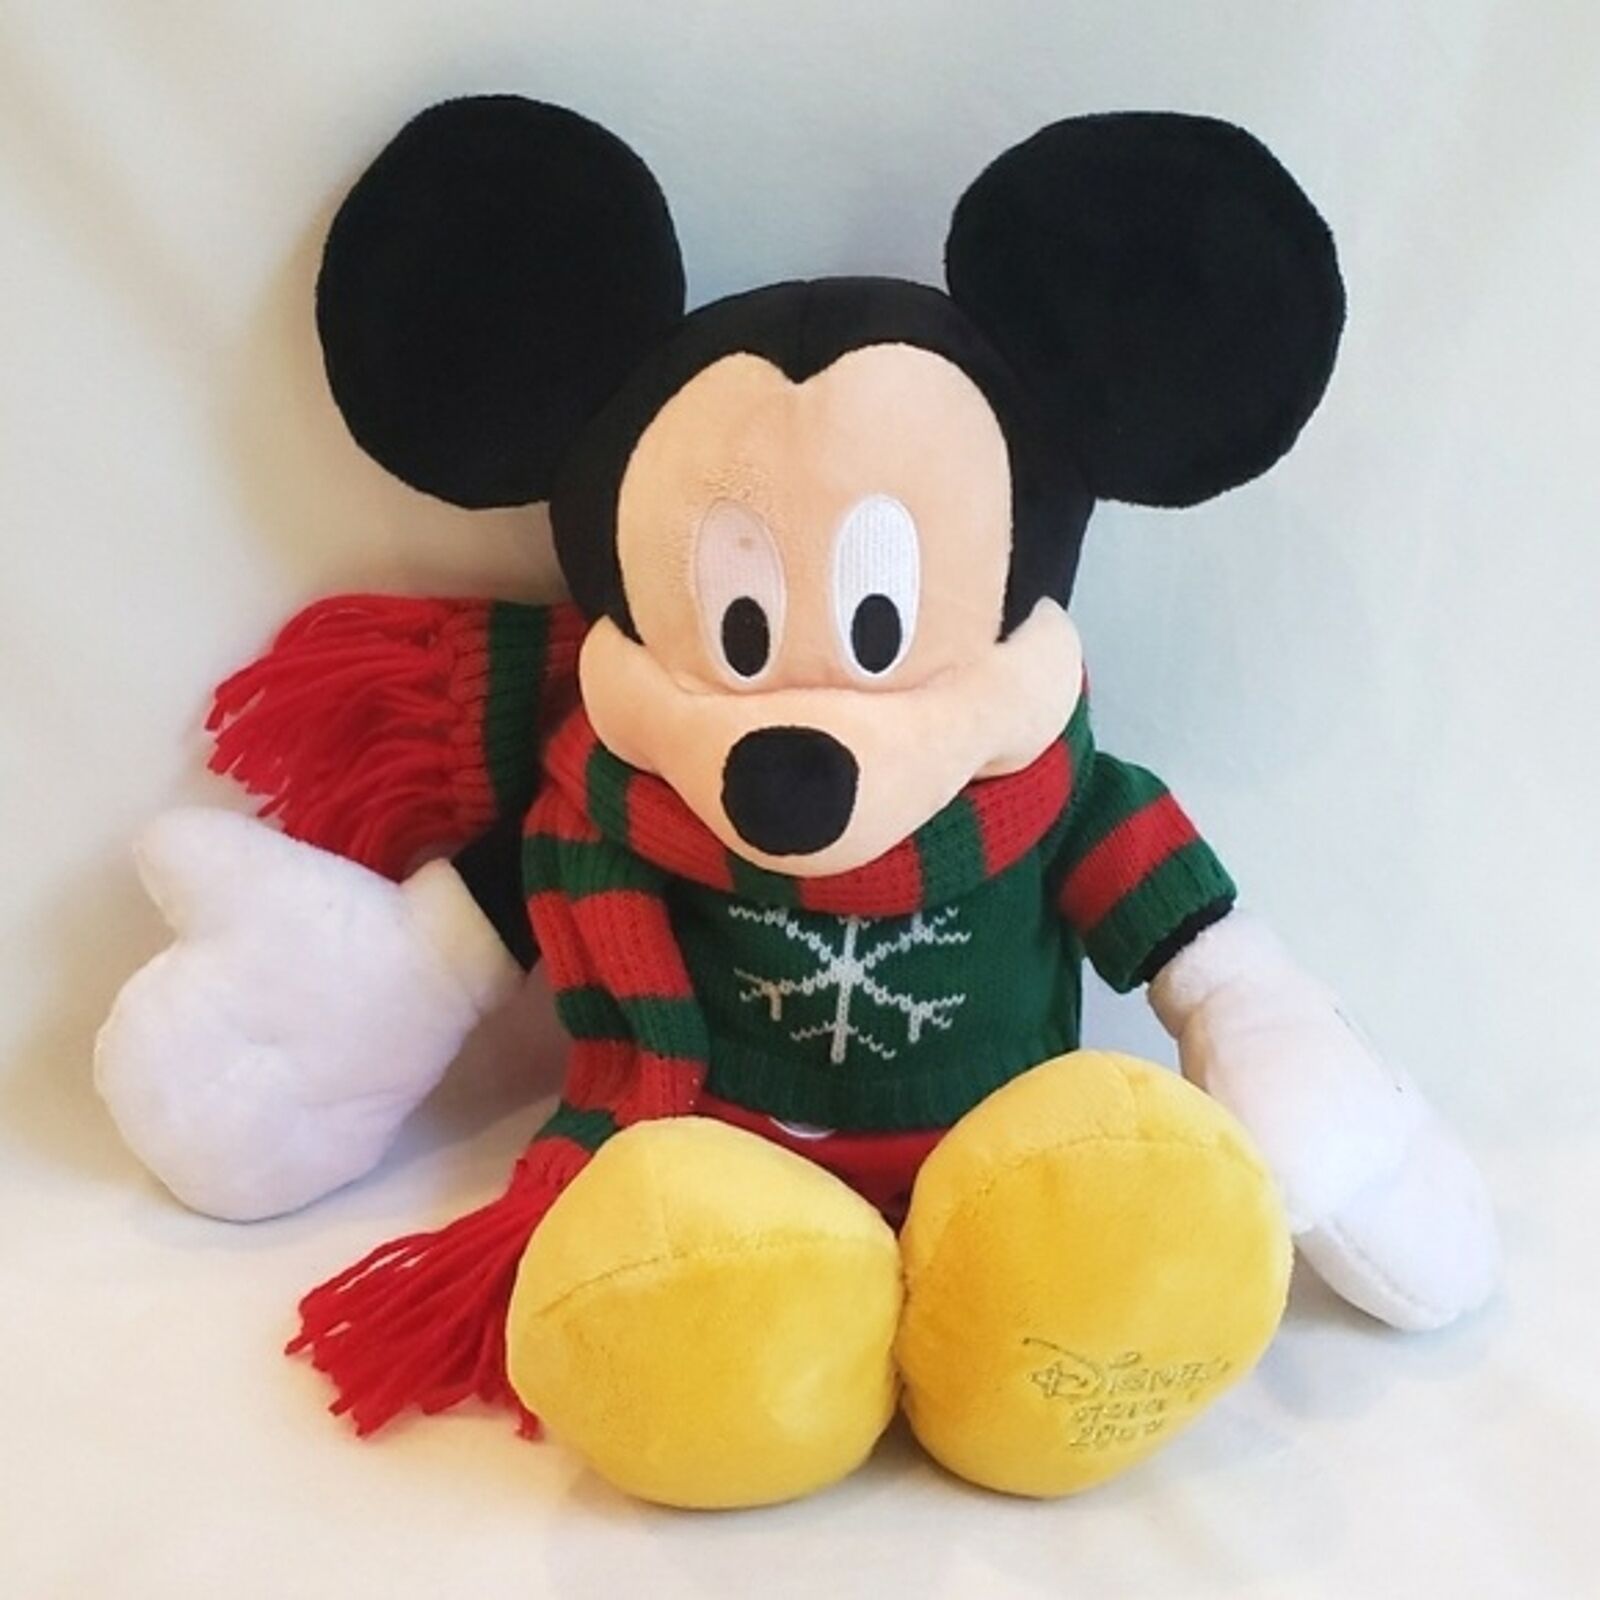 NEW NWT Disney Store Mickey Mouse Holiday Winter Plush 2009